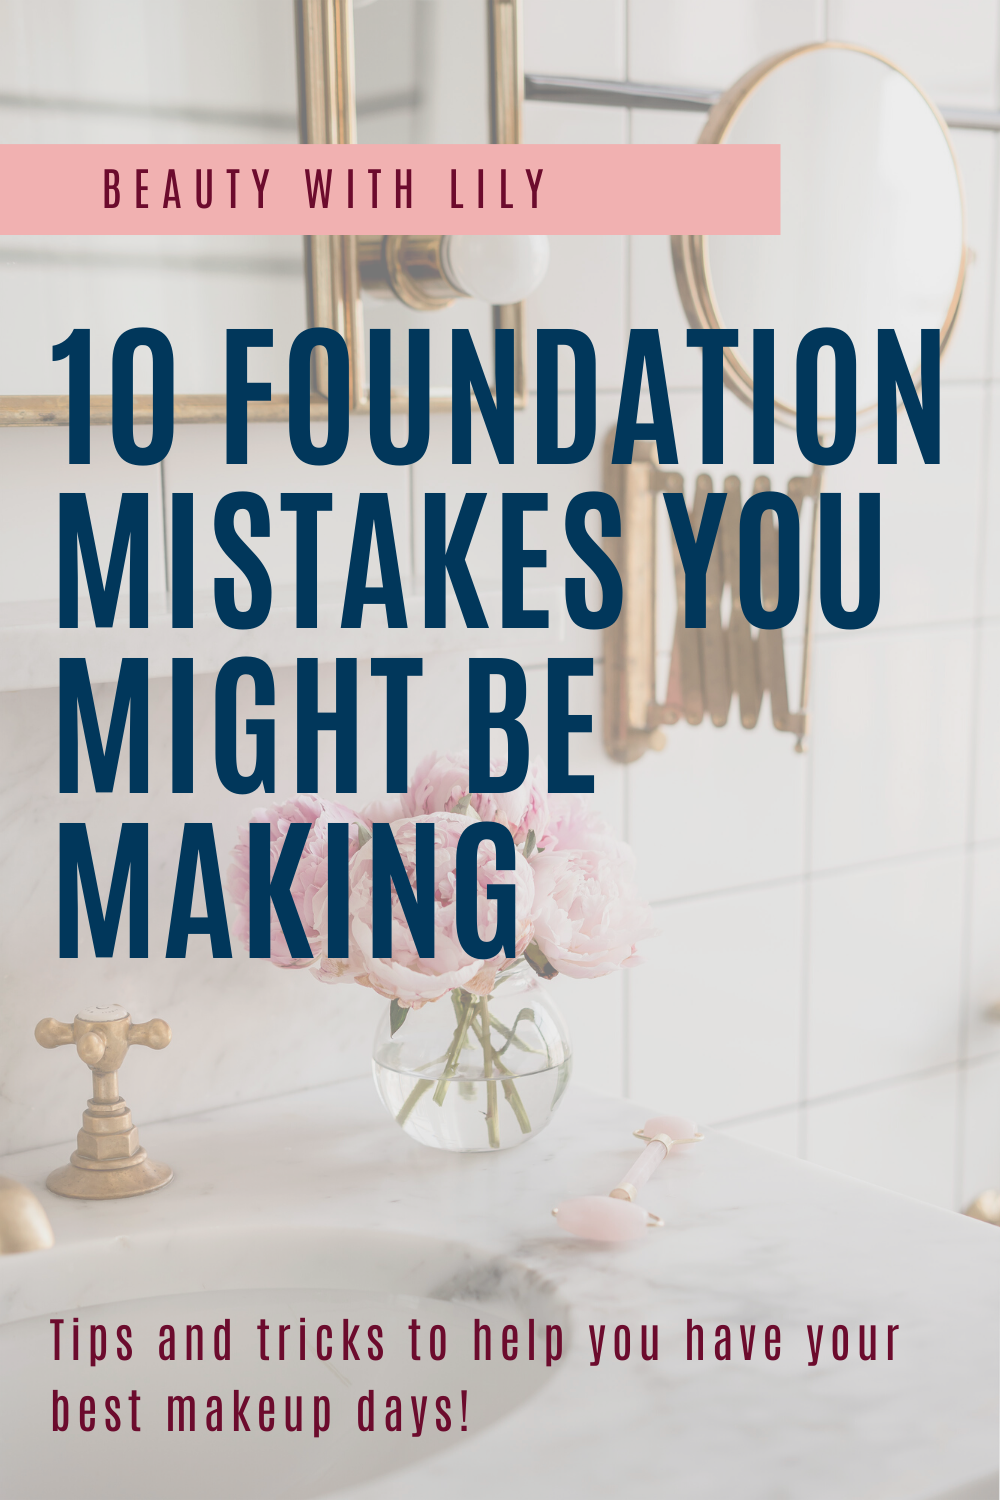 10 Foundation Mistakes You Might Be Making // How to Apply Foundation // Foundation Tips & Tricks // Foundation Hacks // Makeup Tips & Tricks // Makeup Hacks | Beauty With Lily #foundationhacks #makeup101 #makeuptips